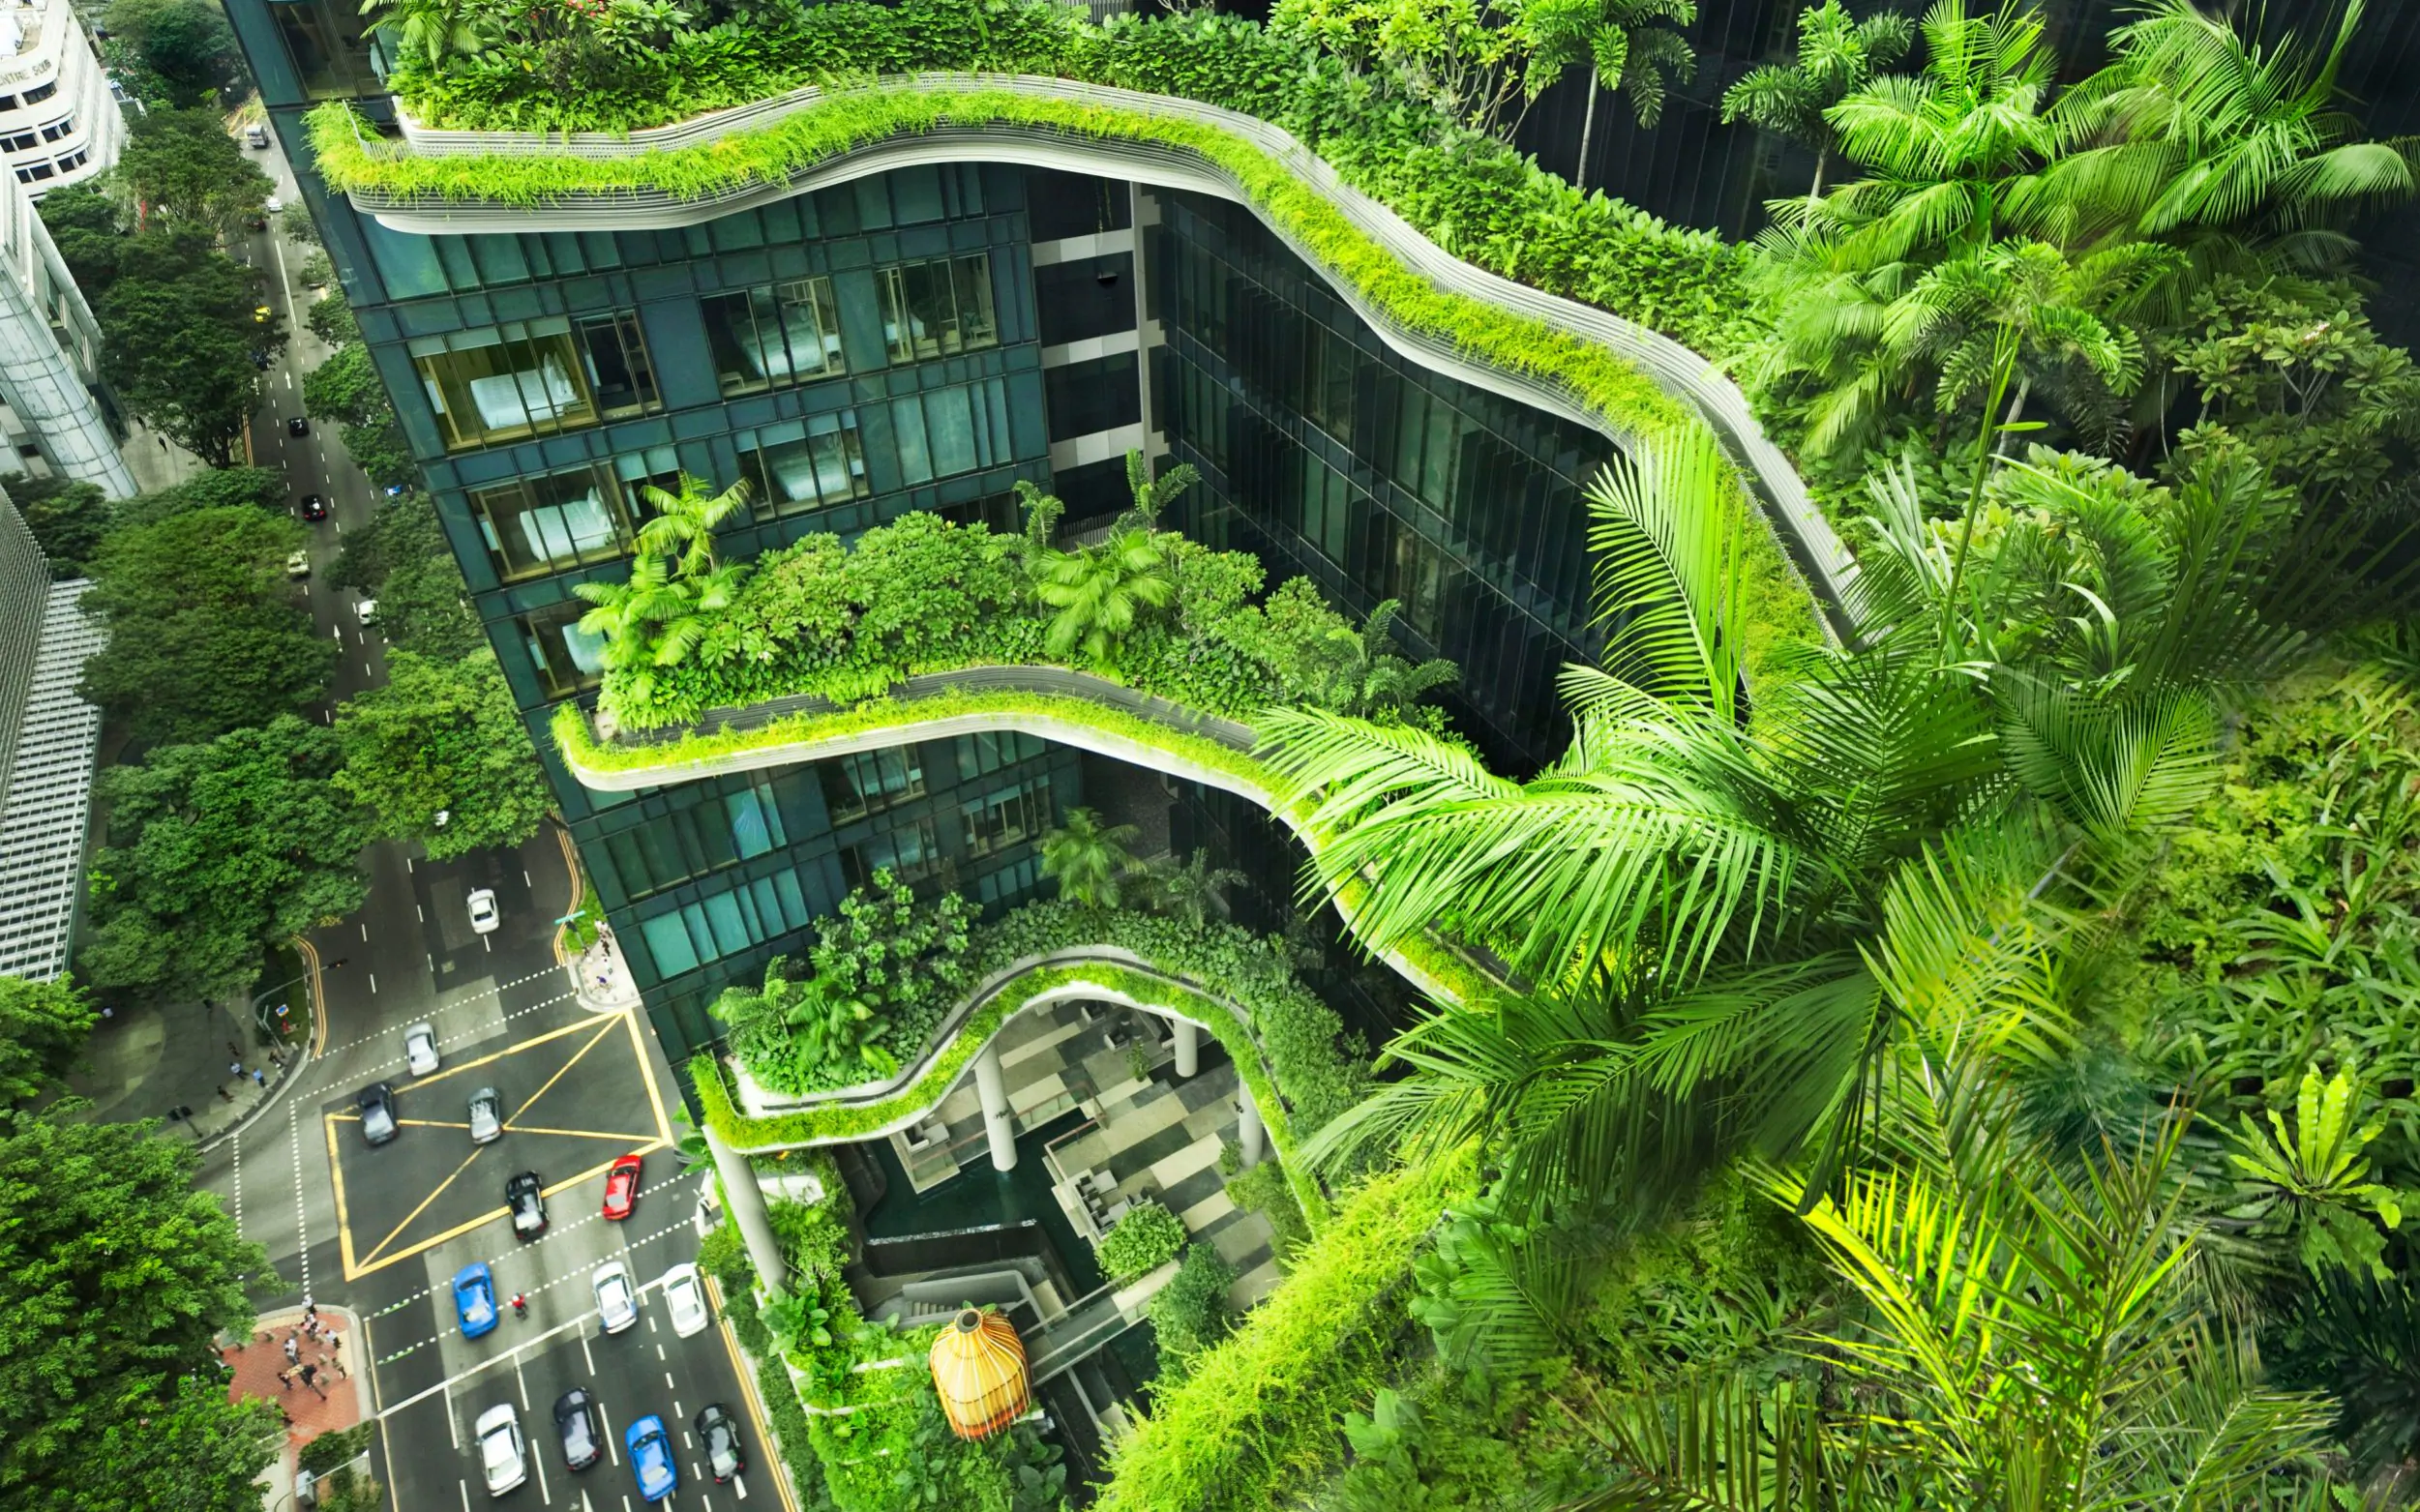 “Elevated Eden: Modern Living Surrounded by Greenery”